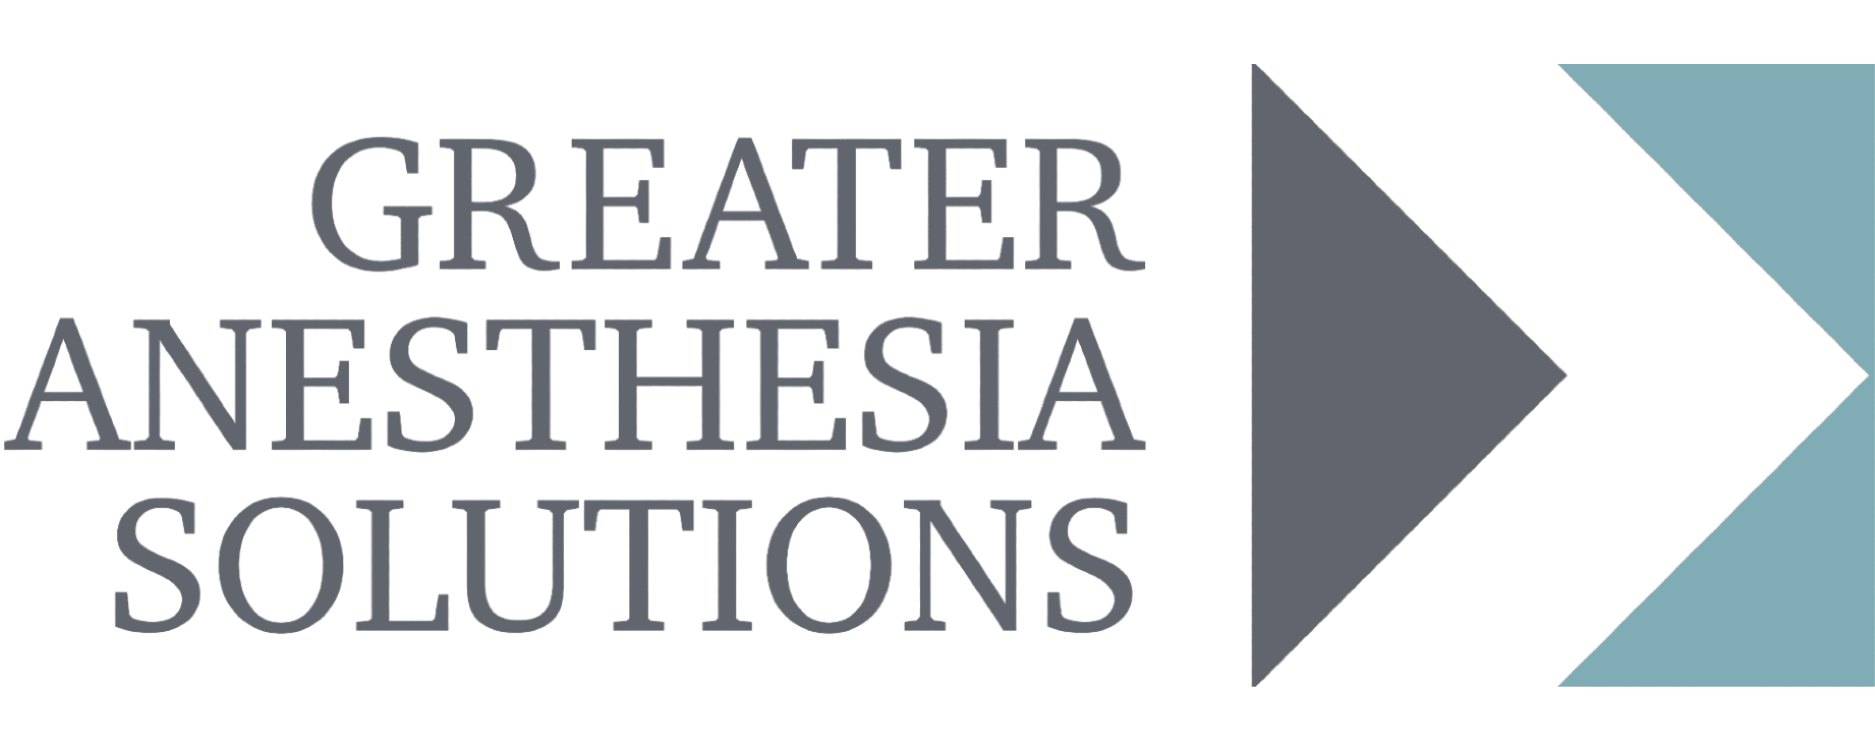 Greater Anesthesia Solutions Logo